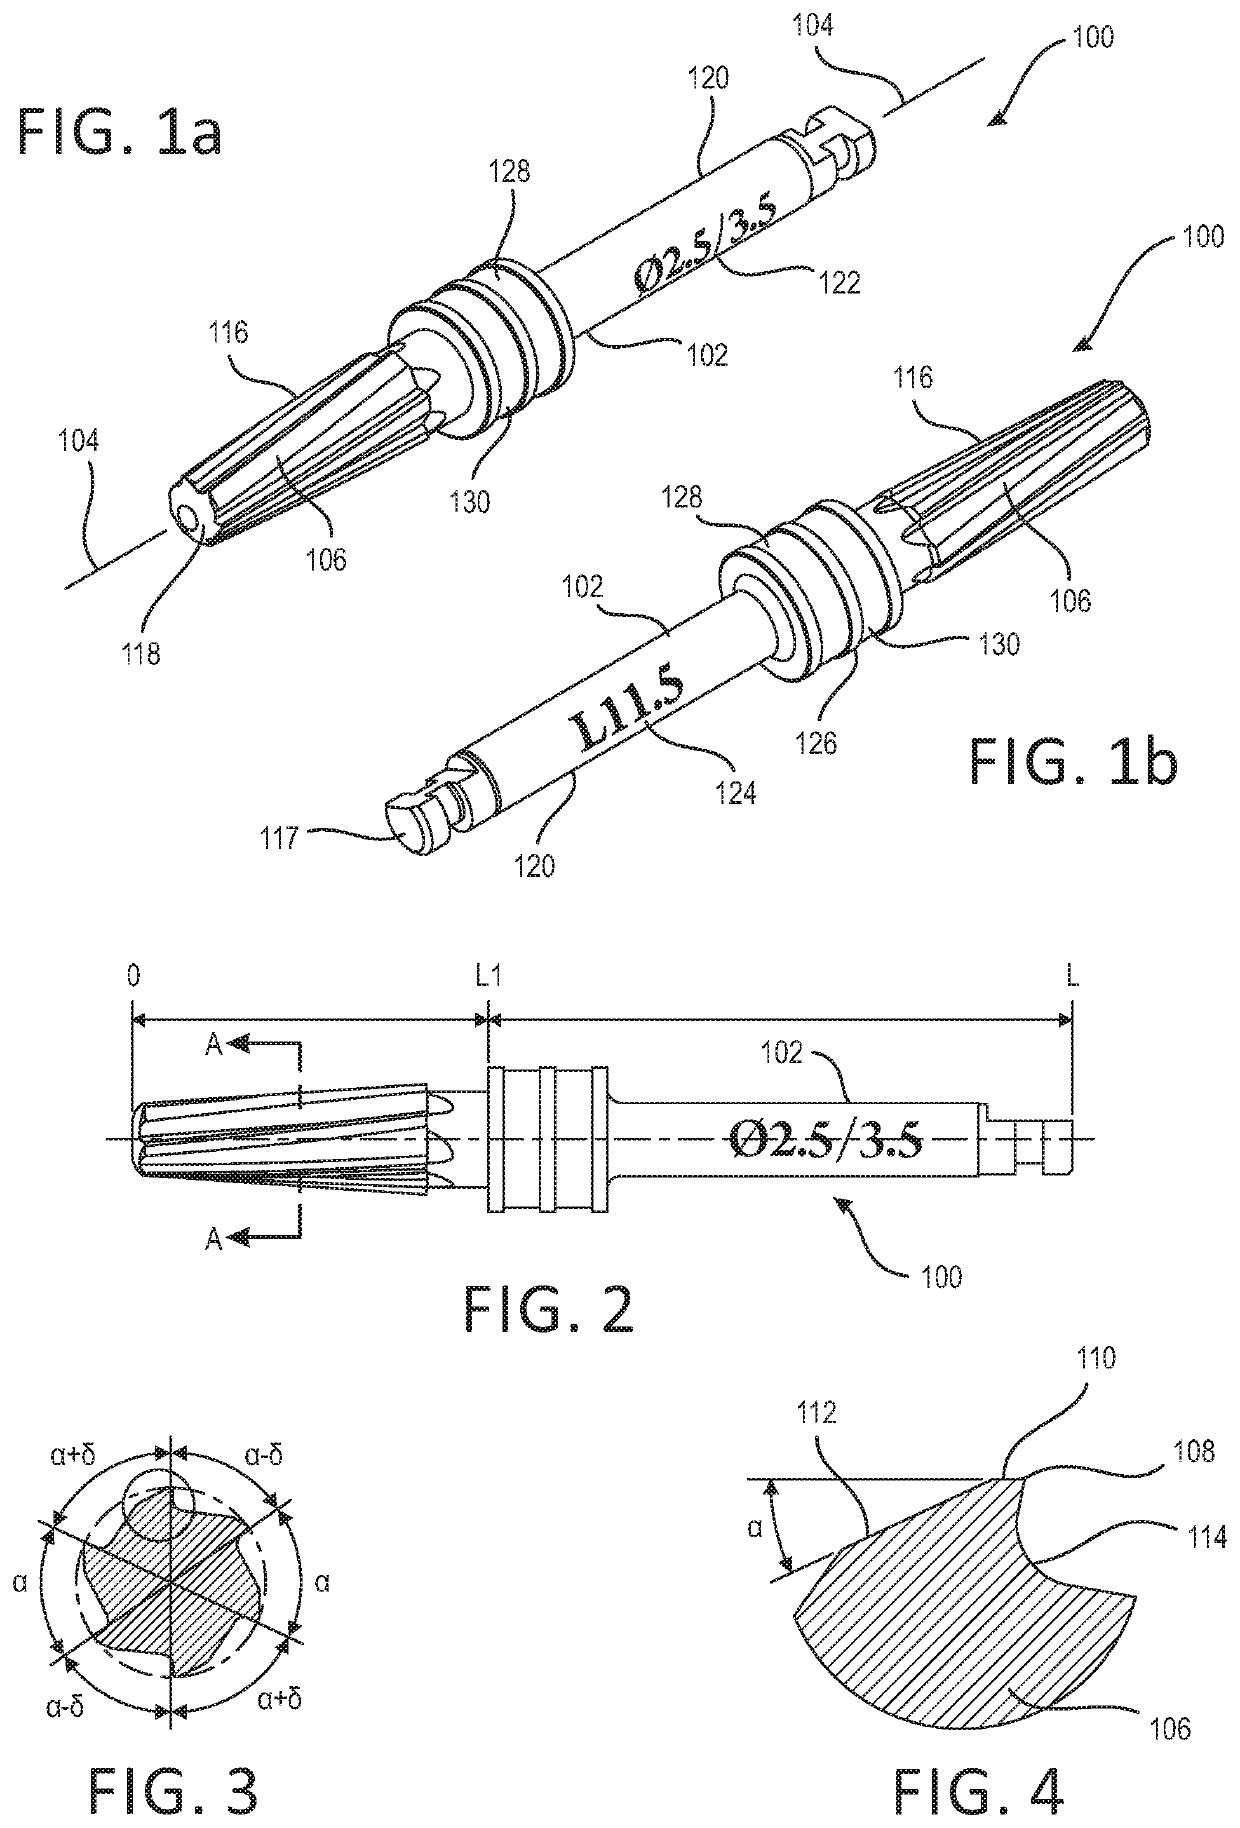 Compression tool for dental implantation sites, and a method of using the same